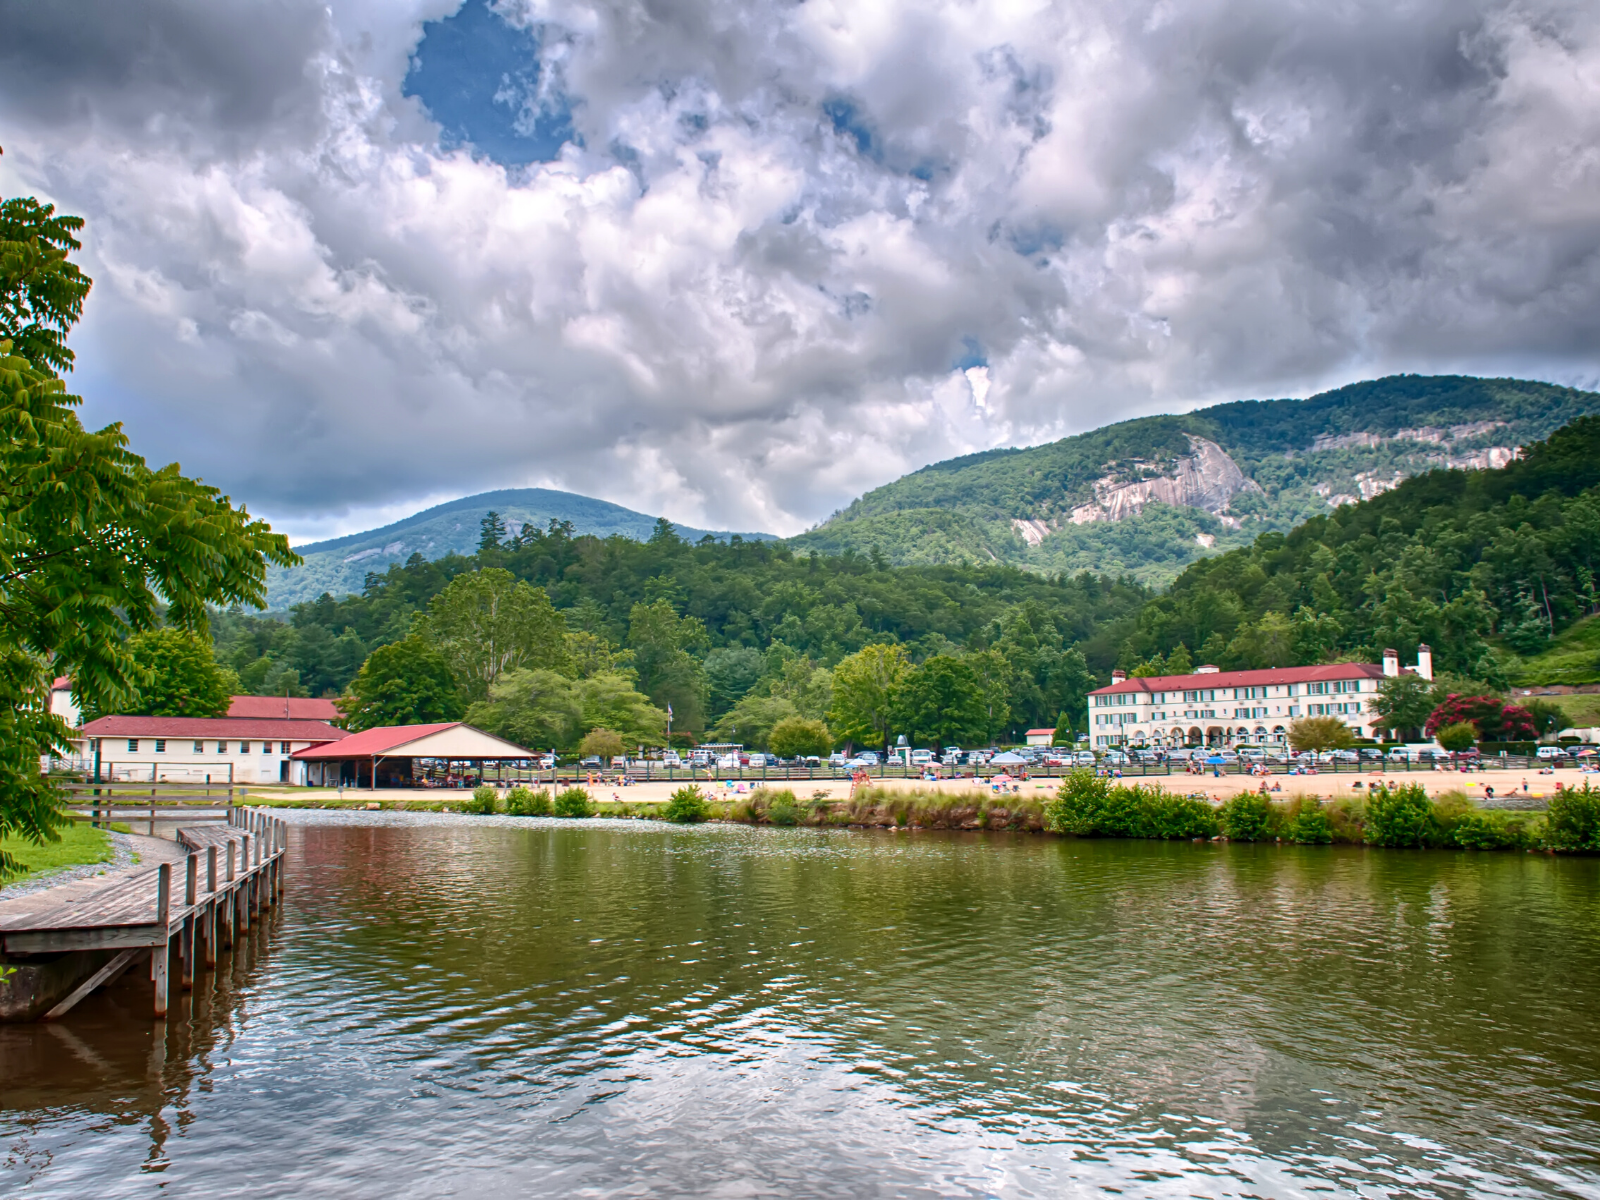 Things to Do in Chimney Rock & Lake Lure